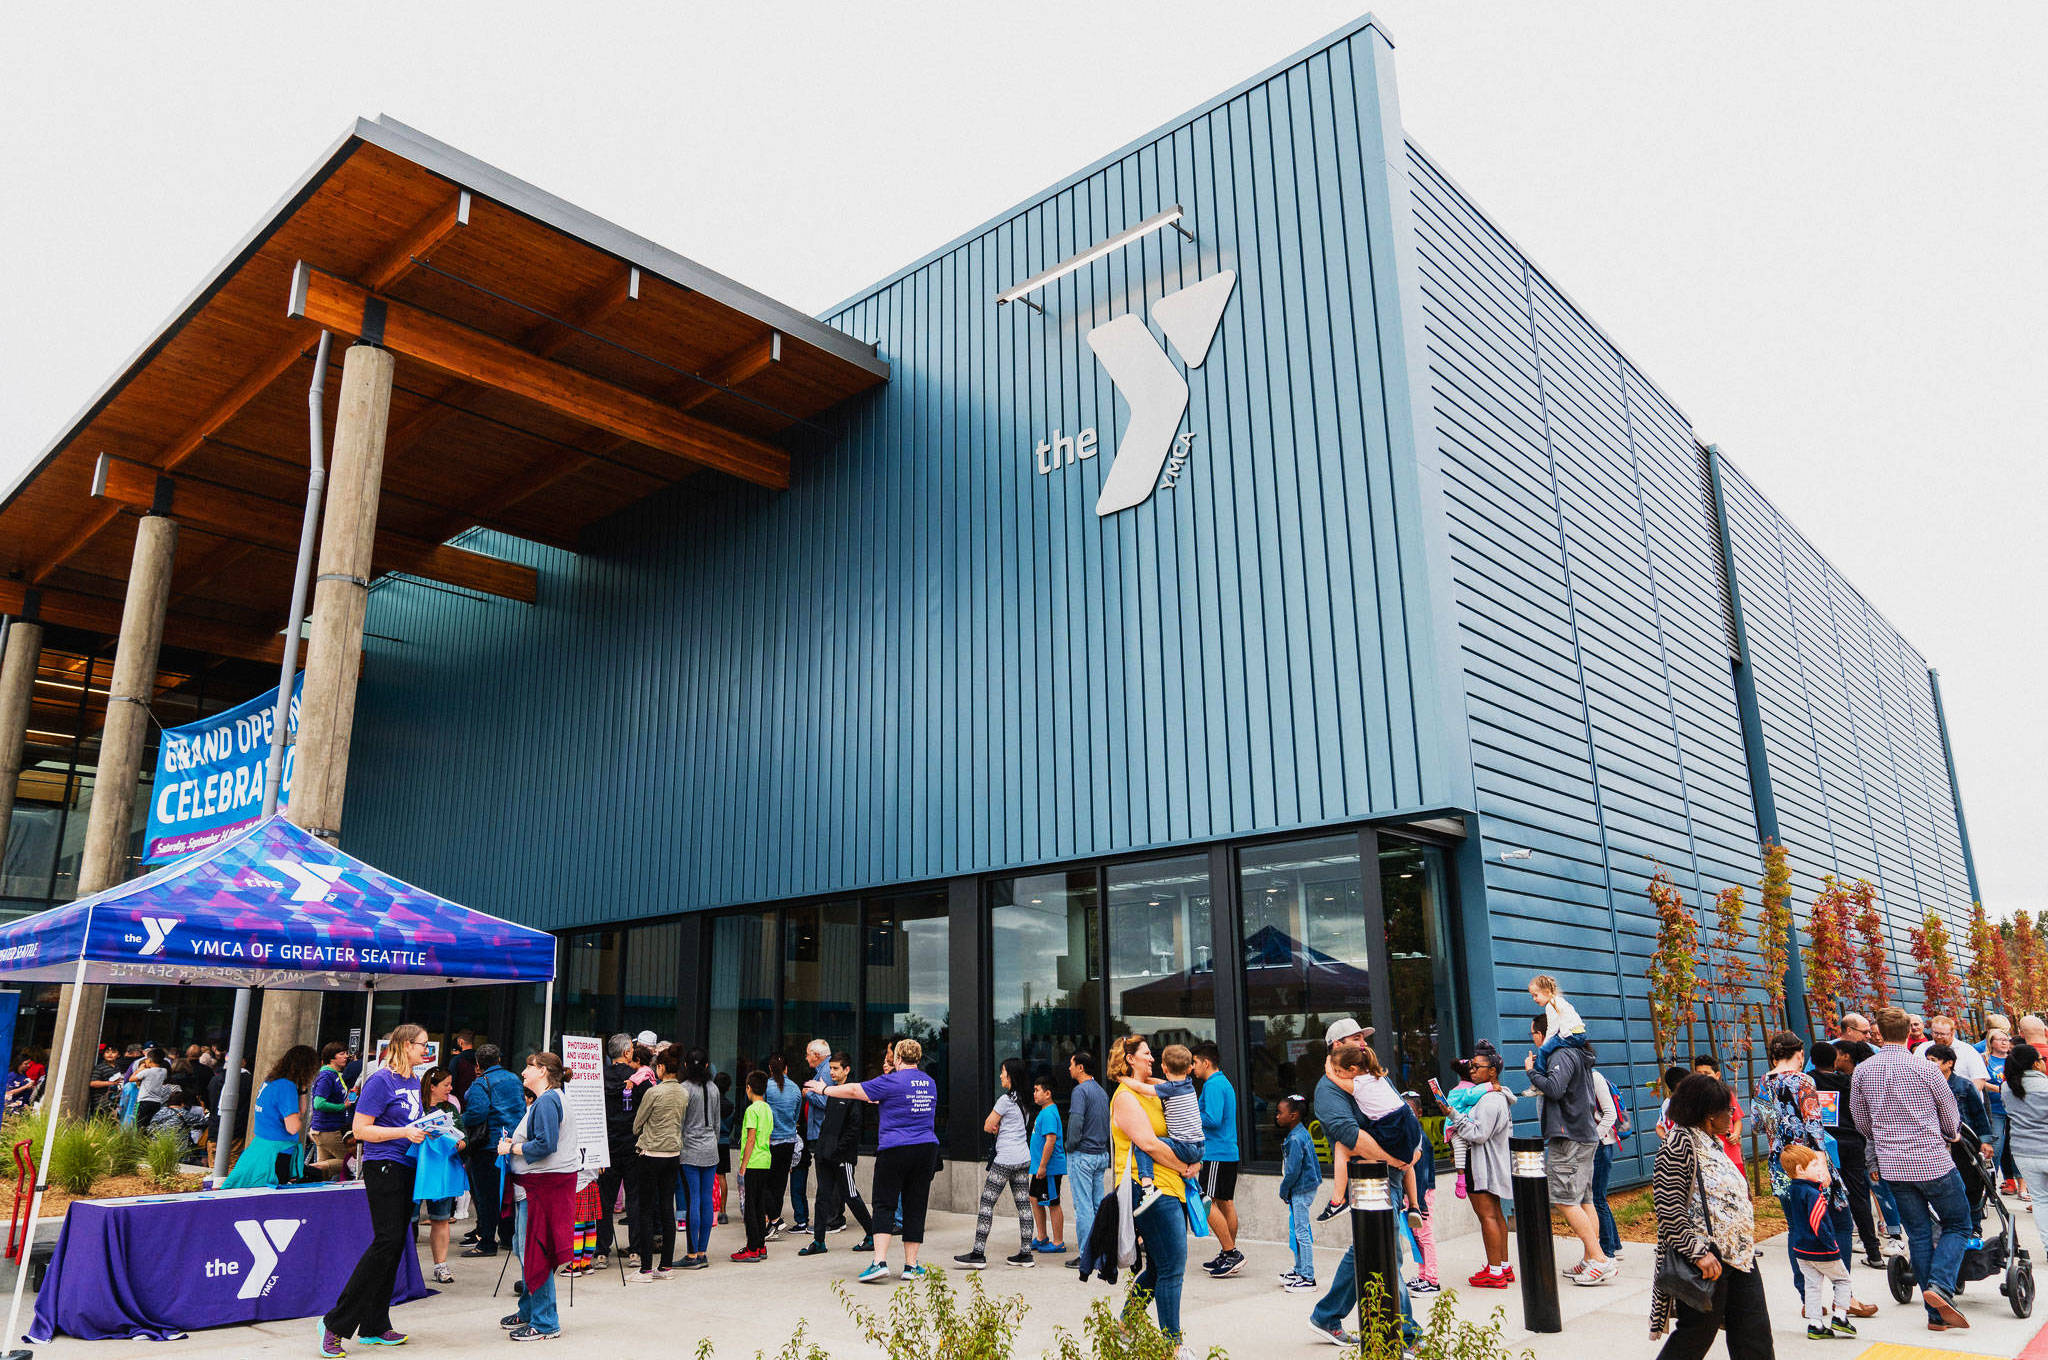 The YMCA of Greater Seattle opened its Kent branch in 2019. COURTESY PHOTO,